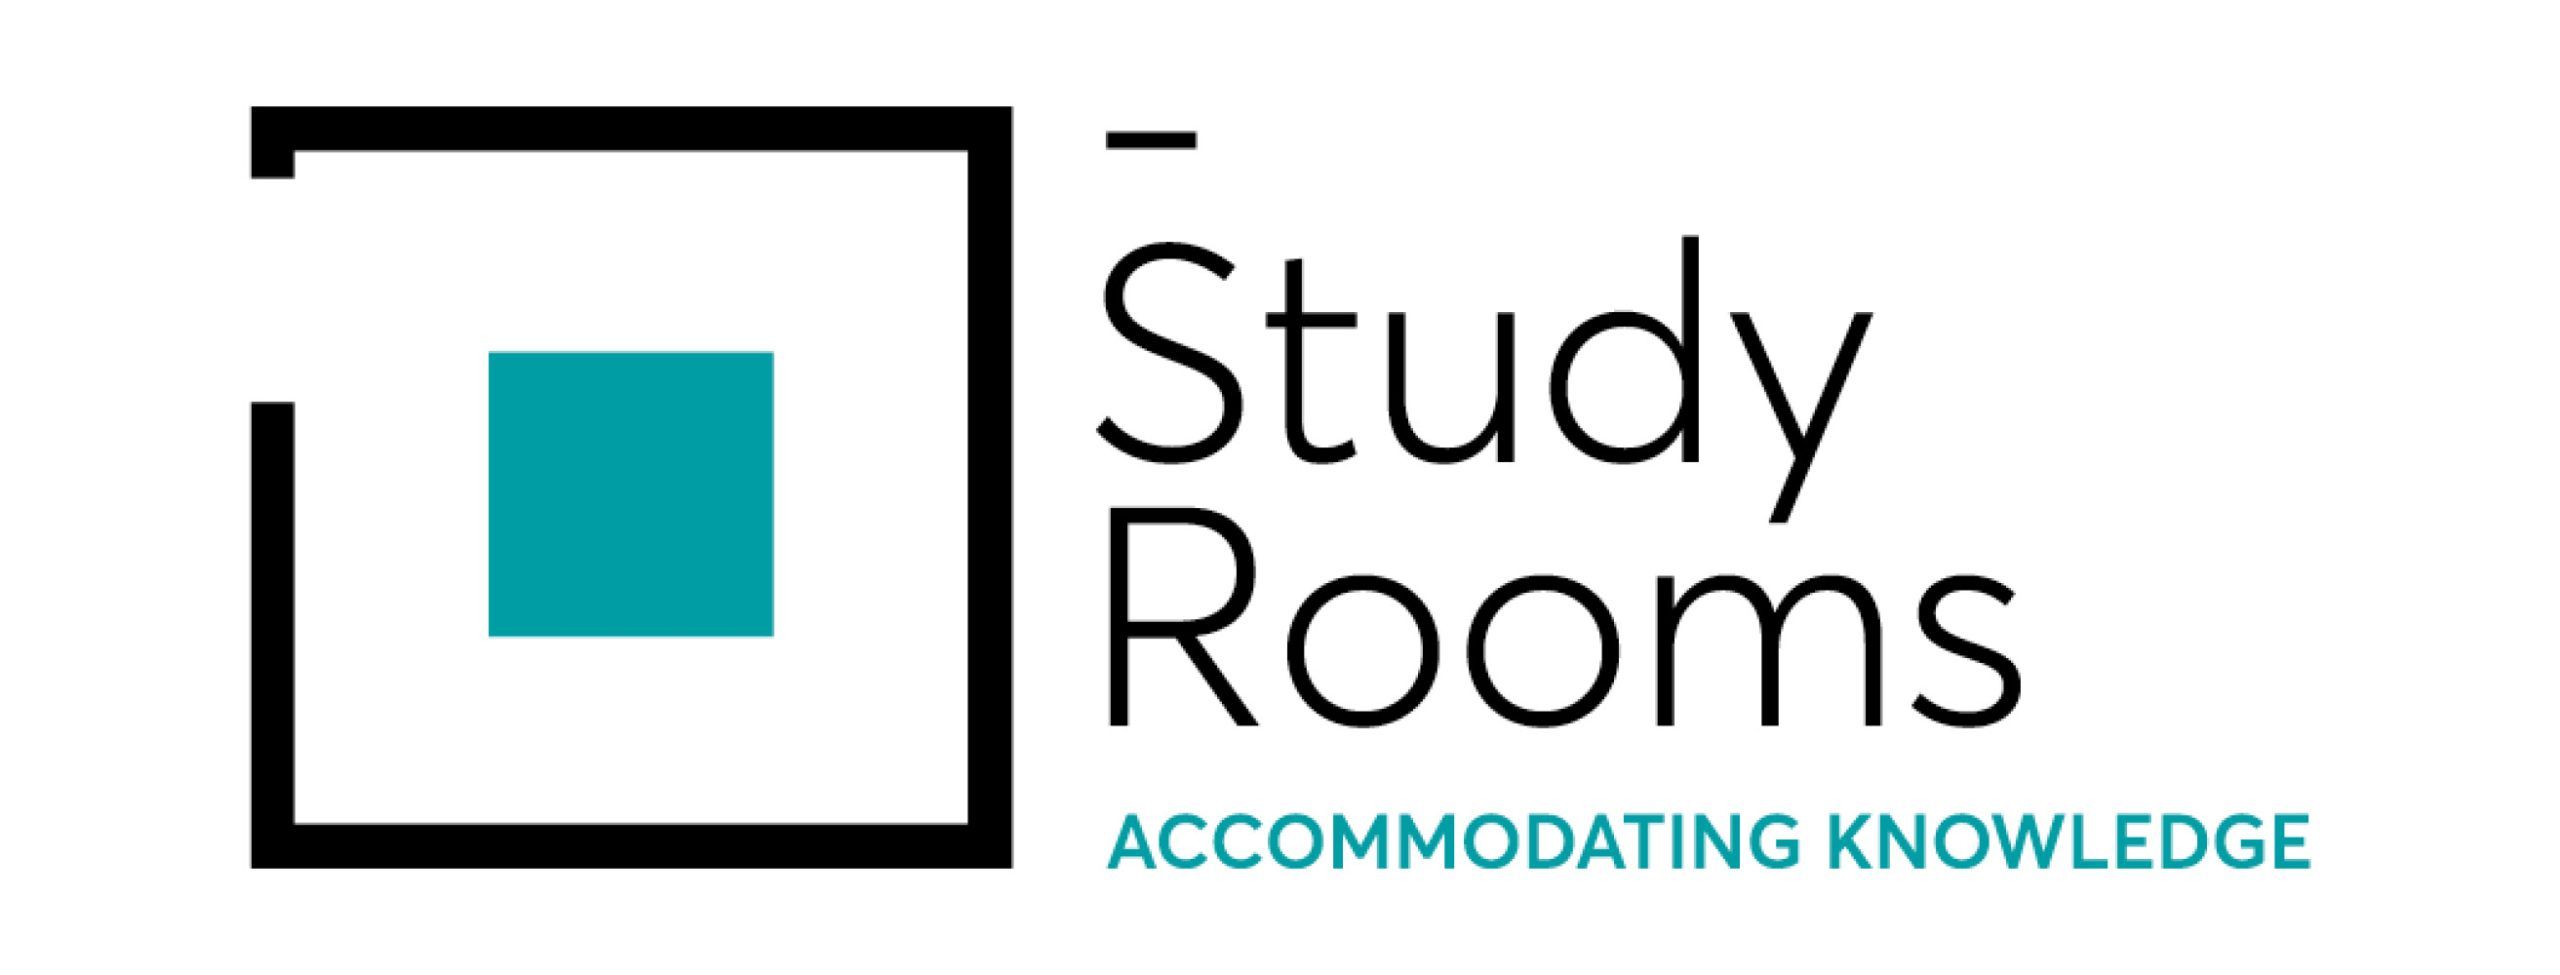 The Study Rooms